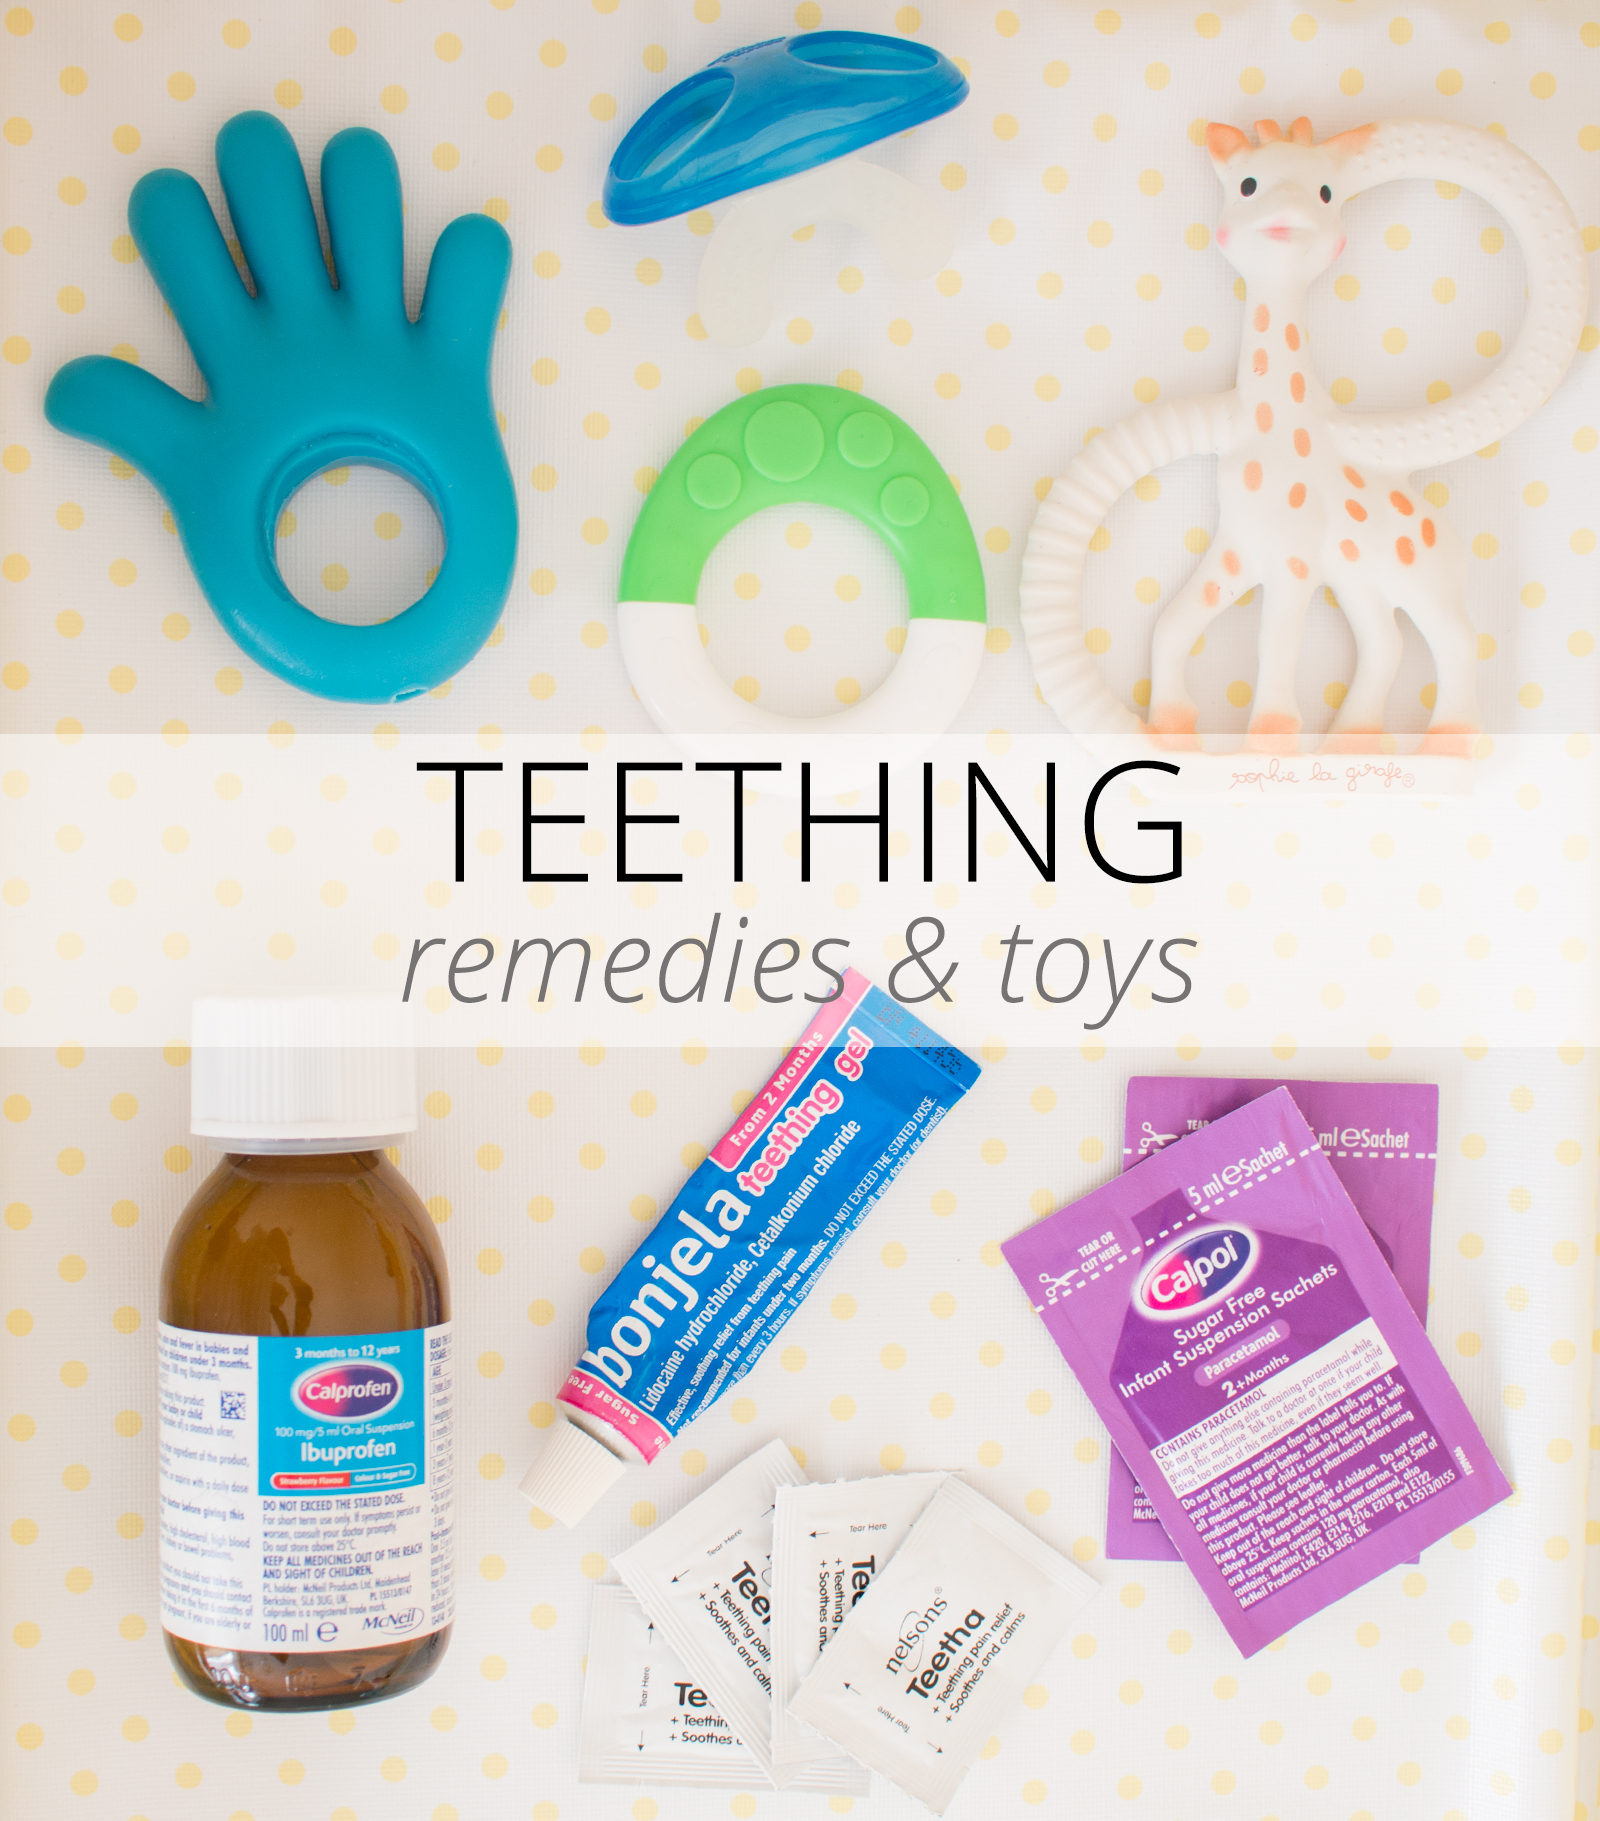 How To Help A Teething Baby - Toys, Remedies, Pain Relief